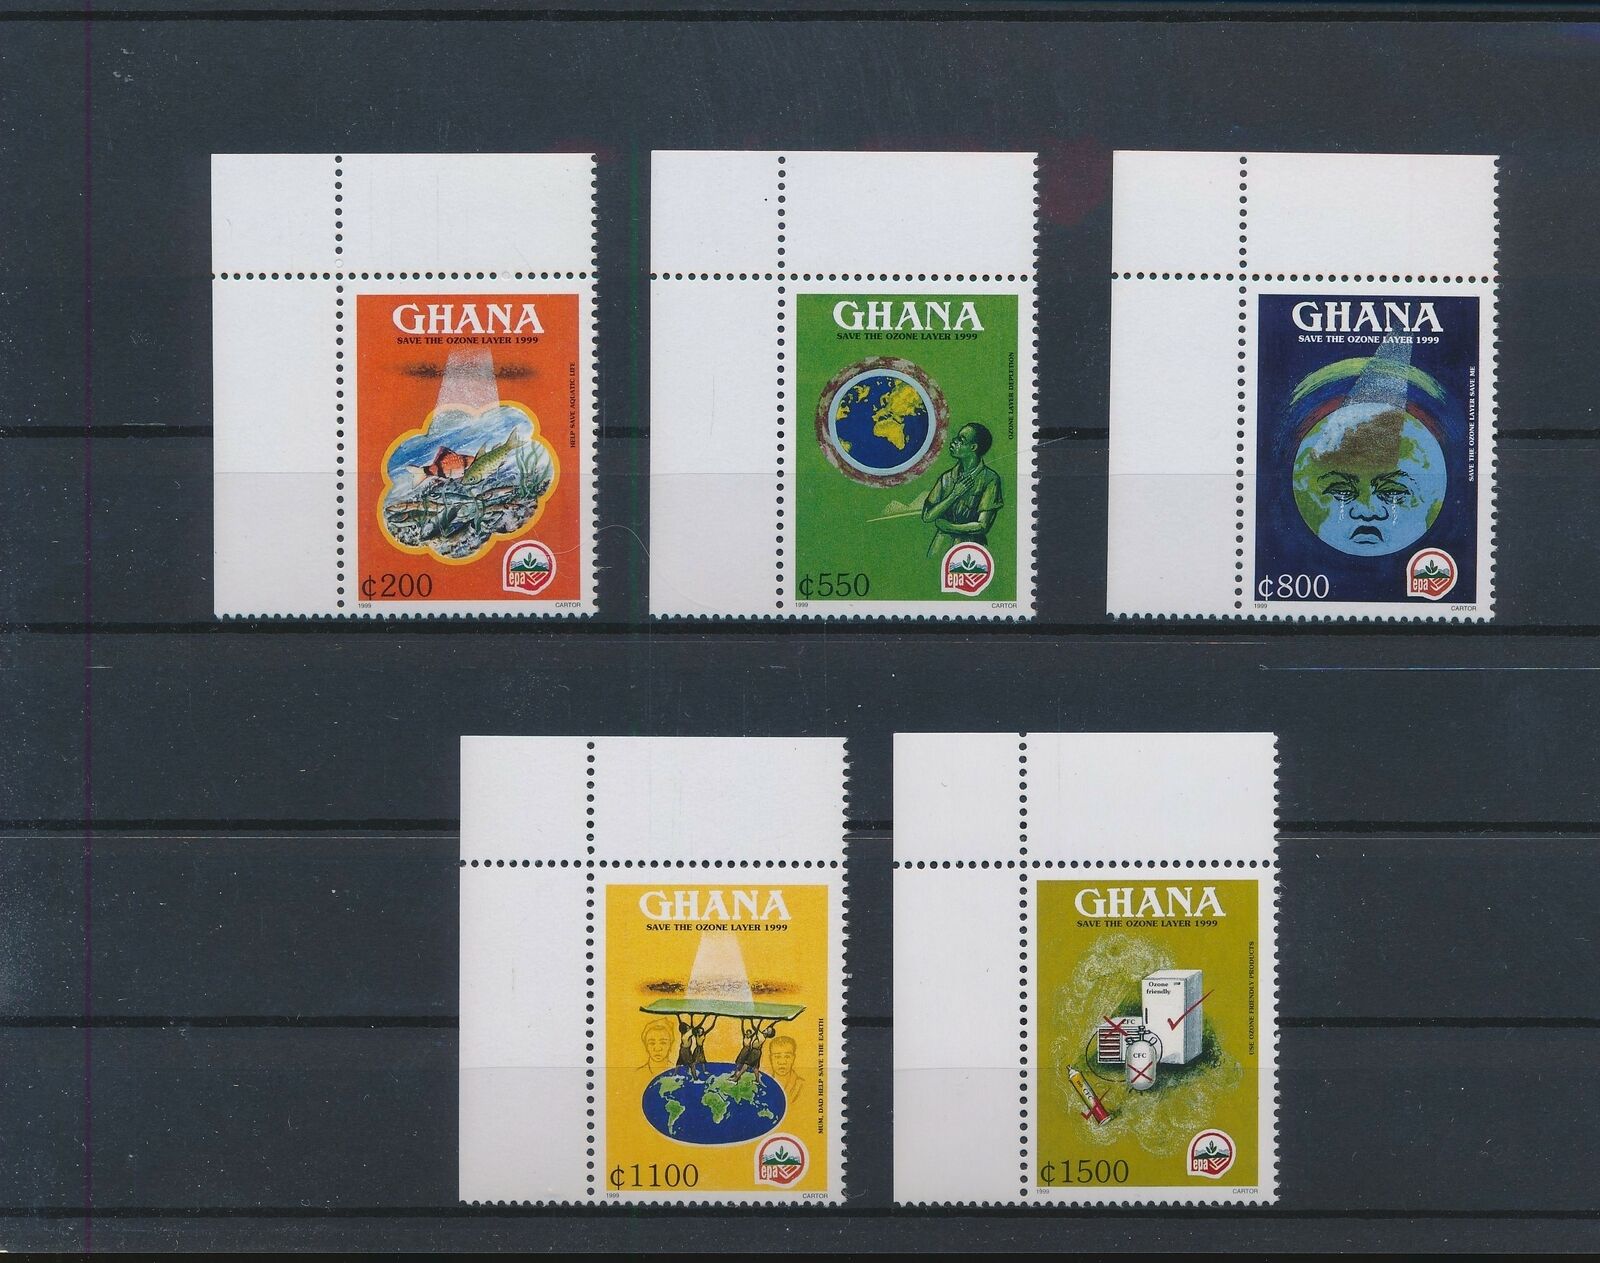 LP03983 Ghana ozone layer MNH nature Opening large Bombing new work release sale corners